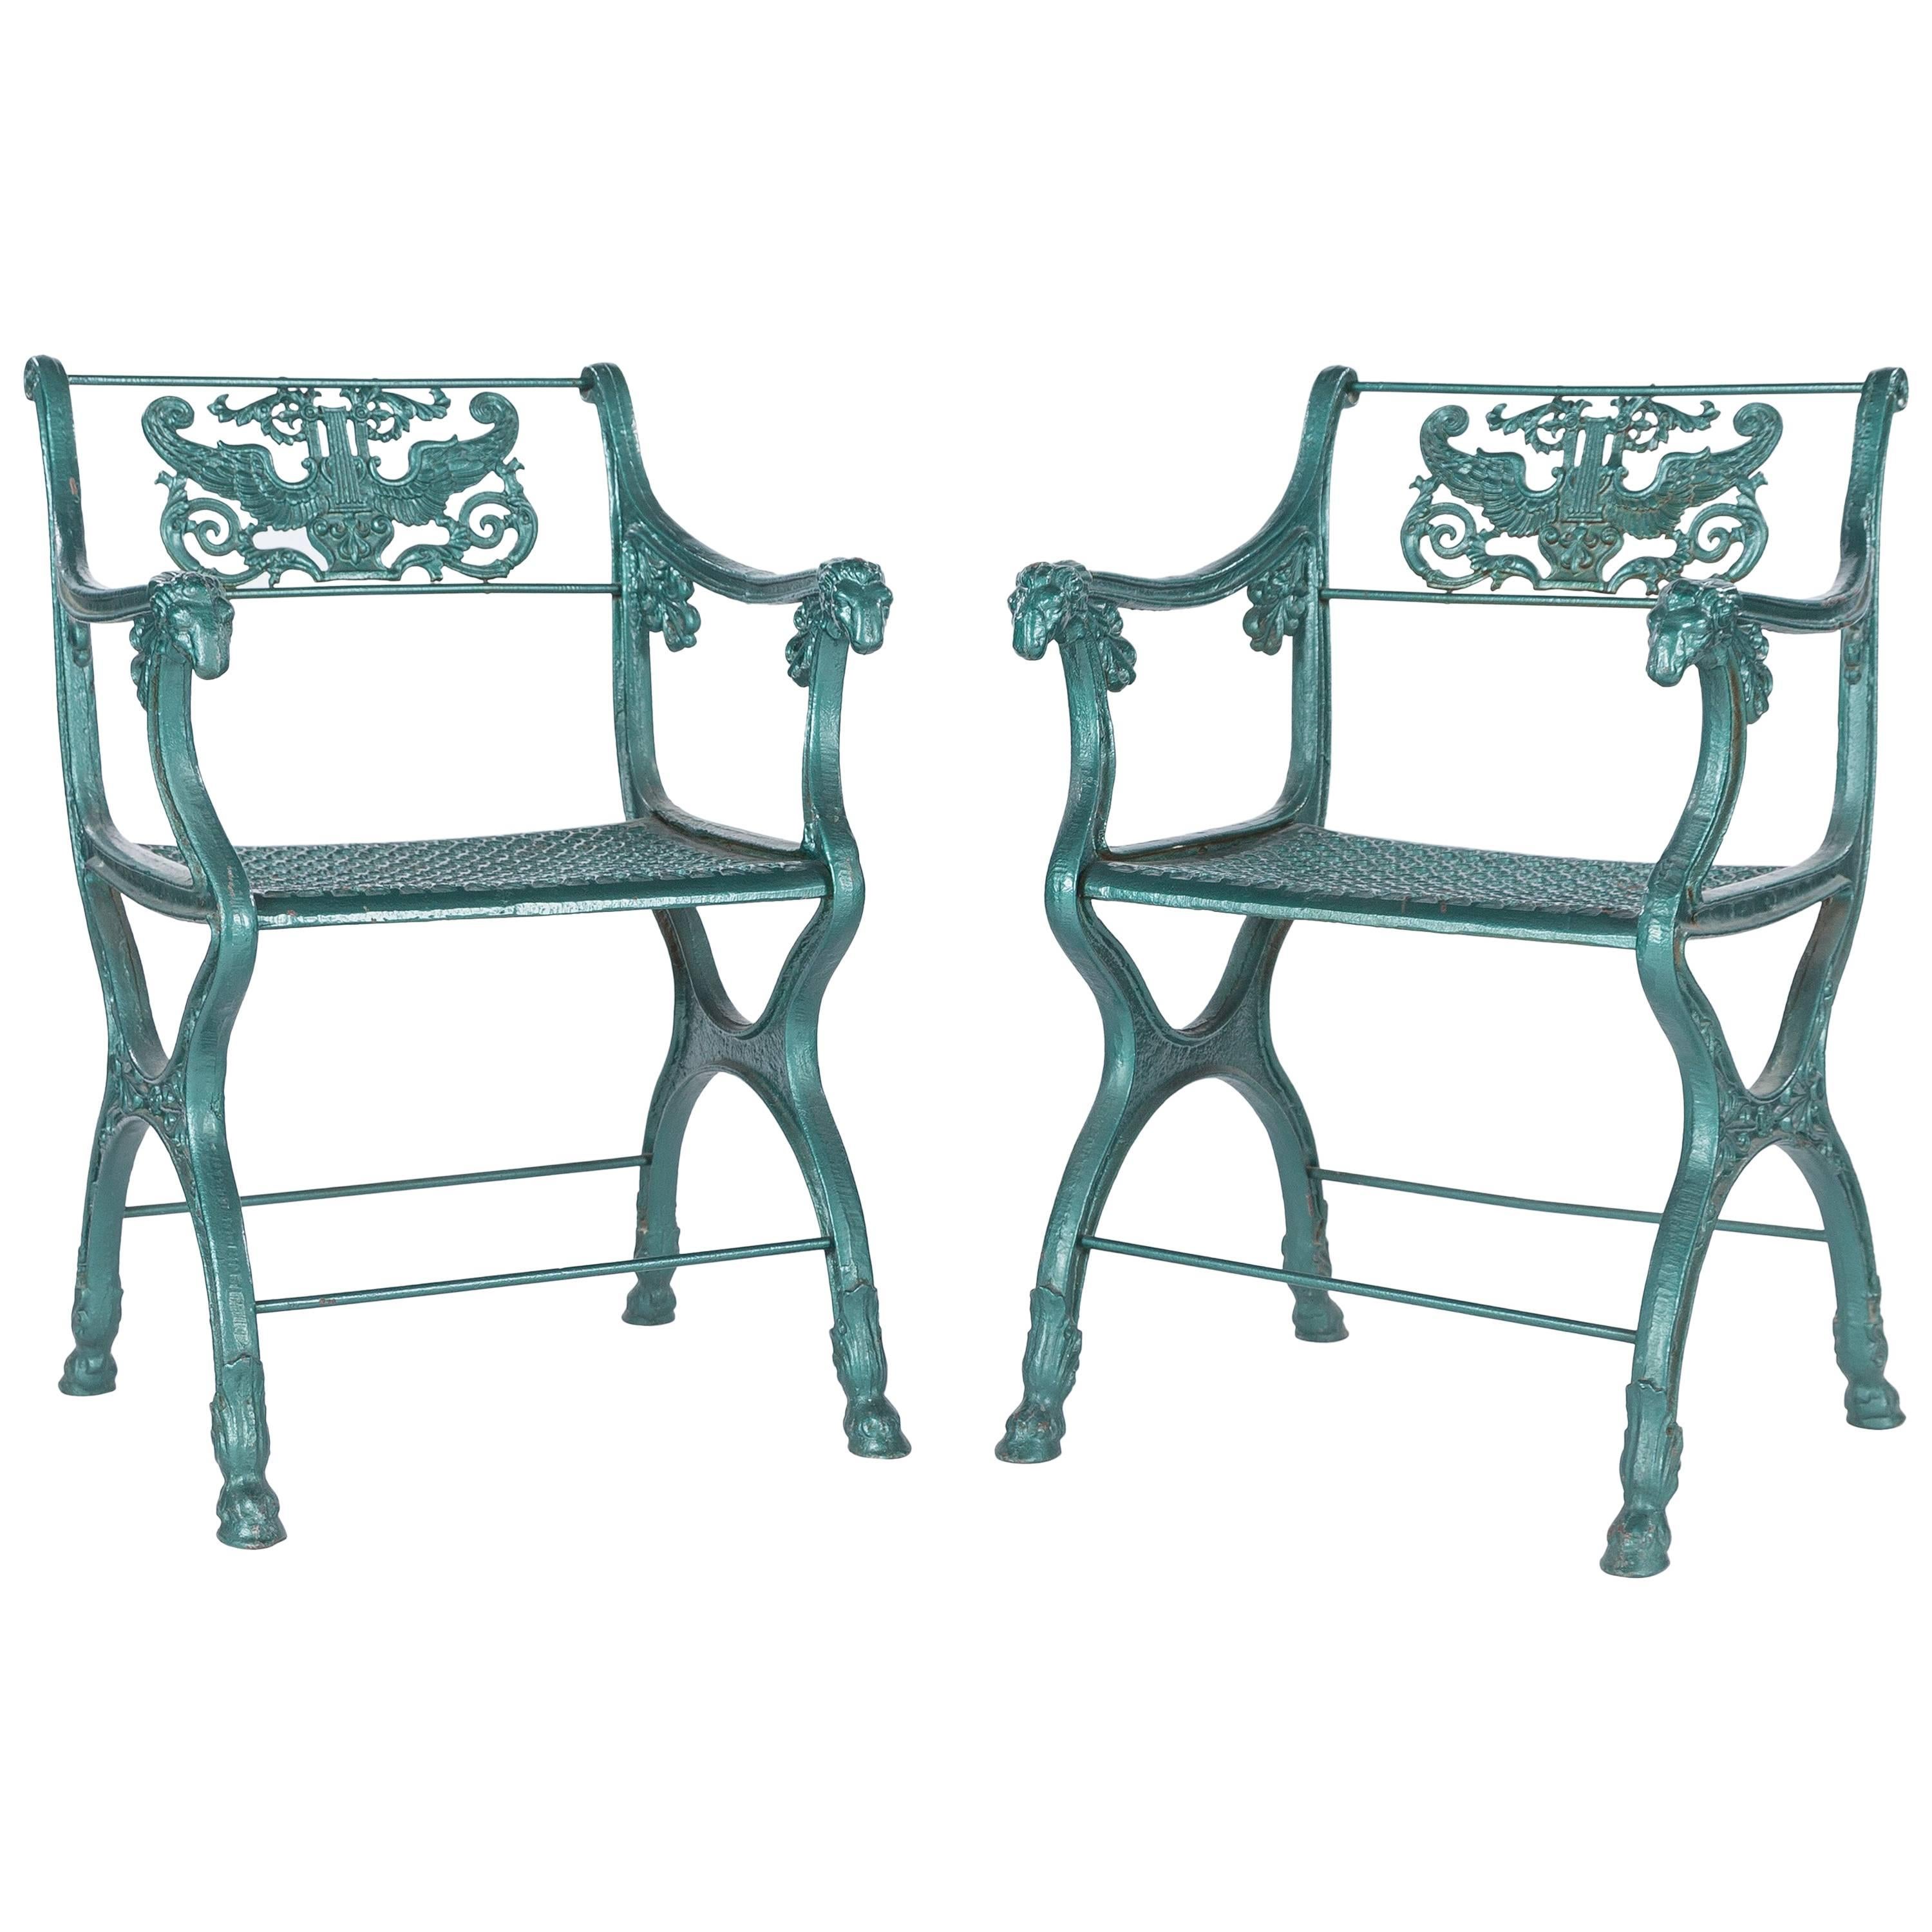 Pair of Classic Roman-Style English Cast Iron Garden Chairs, 19th Century For Sale